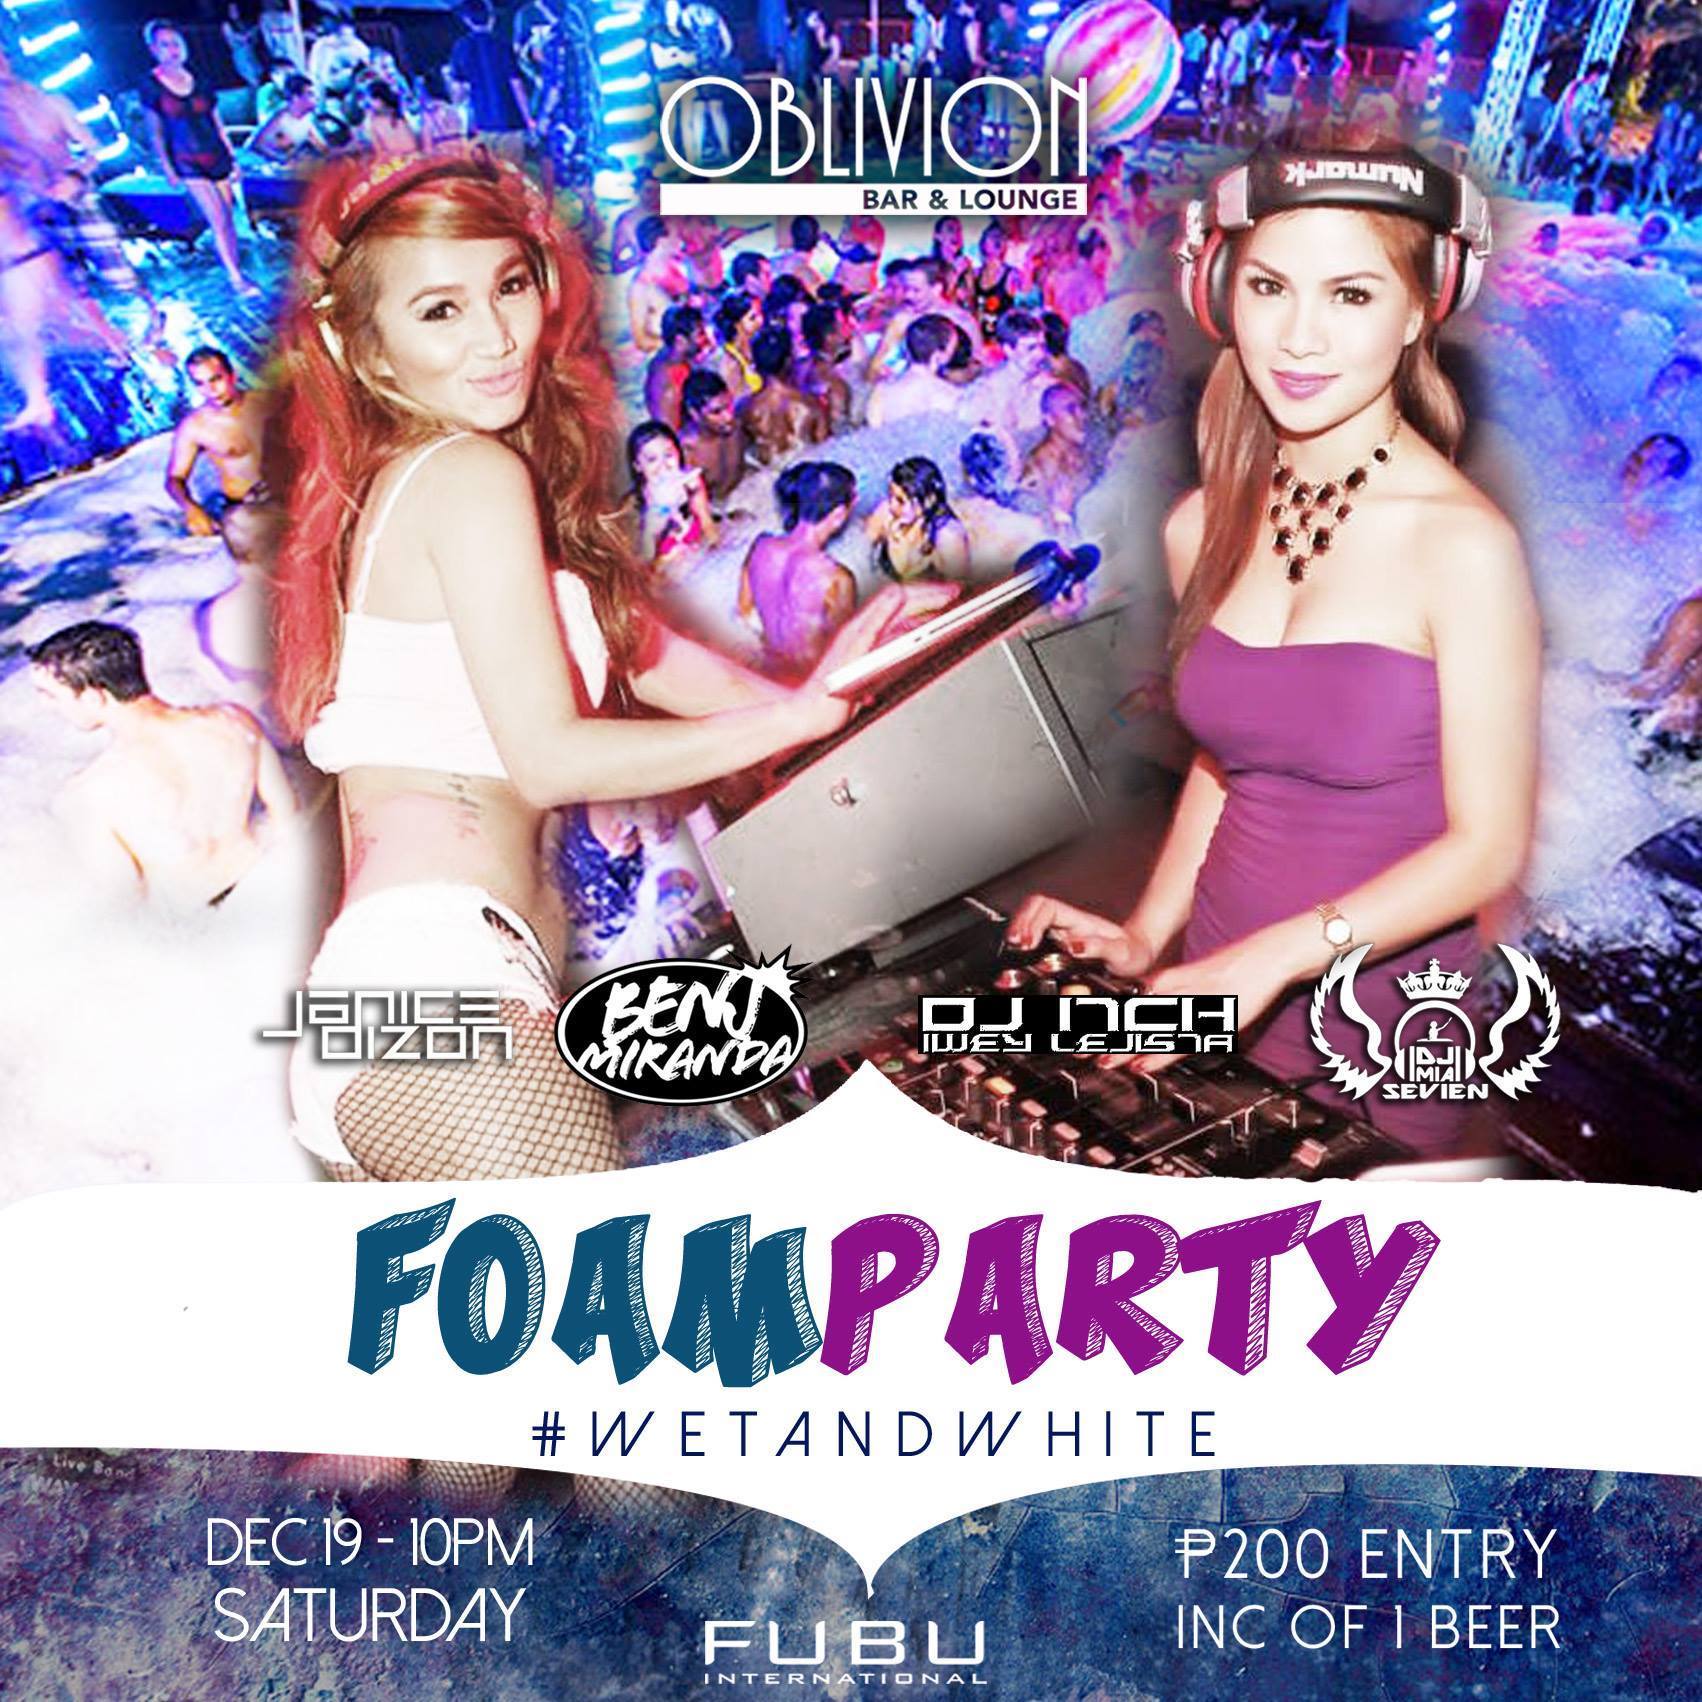 THE ULITIMATE FOAM PARTY #WETANDWHITE clock Saturday, December 19 at 10 PM - 4 AM Dec 19 at 10 PM to Dec 20 at 4 AM pin Show Map Oblivion Bar & Lounge 104 Timog Avenue, 1103 Quezon City, Philippines Oblivion Bar & Lounge Presents "The Ultimate Foam Party #WETANDWHITE" Save the date(December 19, 2015) TOGETHER OUR HOTTEST DJ's: - DJ Janice Dizon - DJ Mia Sevien With MC Benj Miranda will hype the crowd and resident DJ Itch TICKET PRICE: 200php with 1 beer / No ticket needed for VIP Door Opens at 10pm sharp! Minors are not allowed(Bring ID for verification) Drugs/Weapons are not allowed Jejemons are not allowed NO DRESSCODE just wear whatever you want. BRING YOUR SQUAD AND LET'S RAVE!! For more tickets and vip reservation, Contact this number: - 09364215173 - 09364215173 - 09364215173 #OblivionQc #FUBUInternational #WETandWHITE